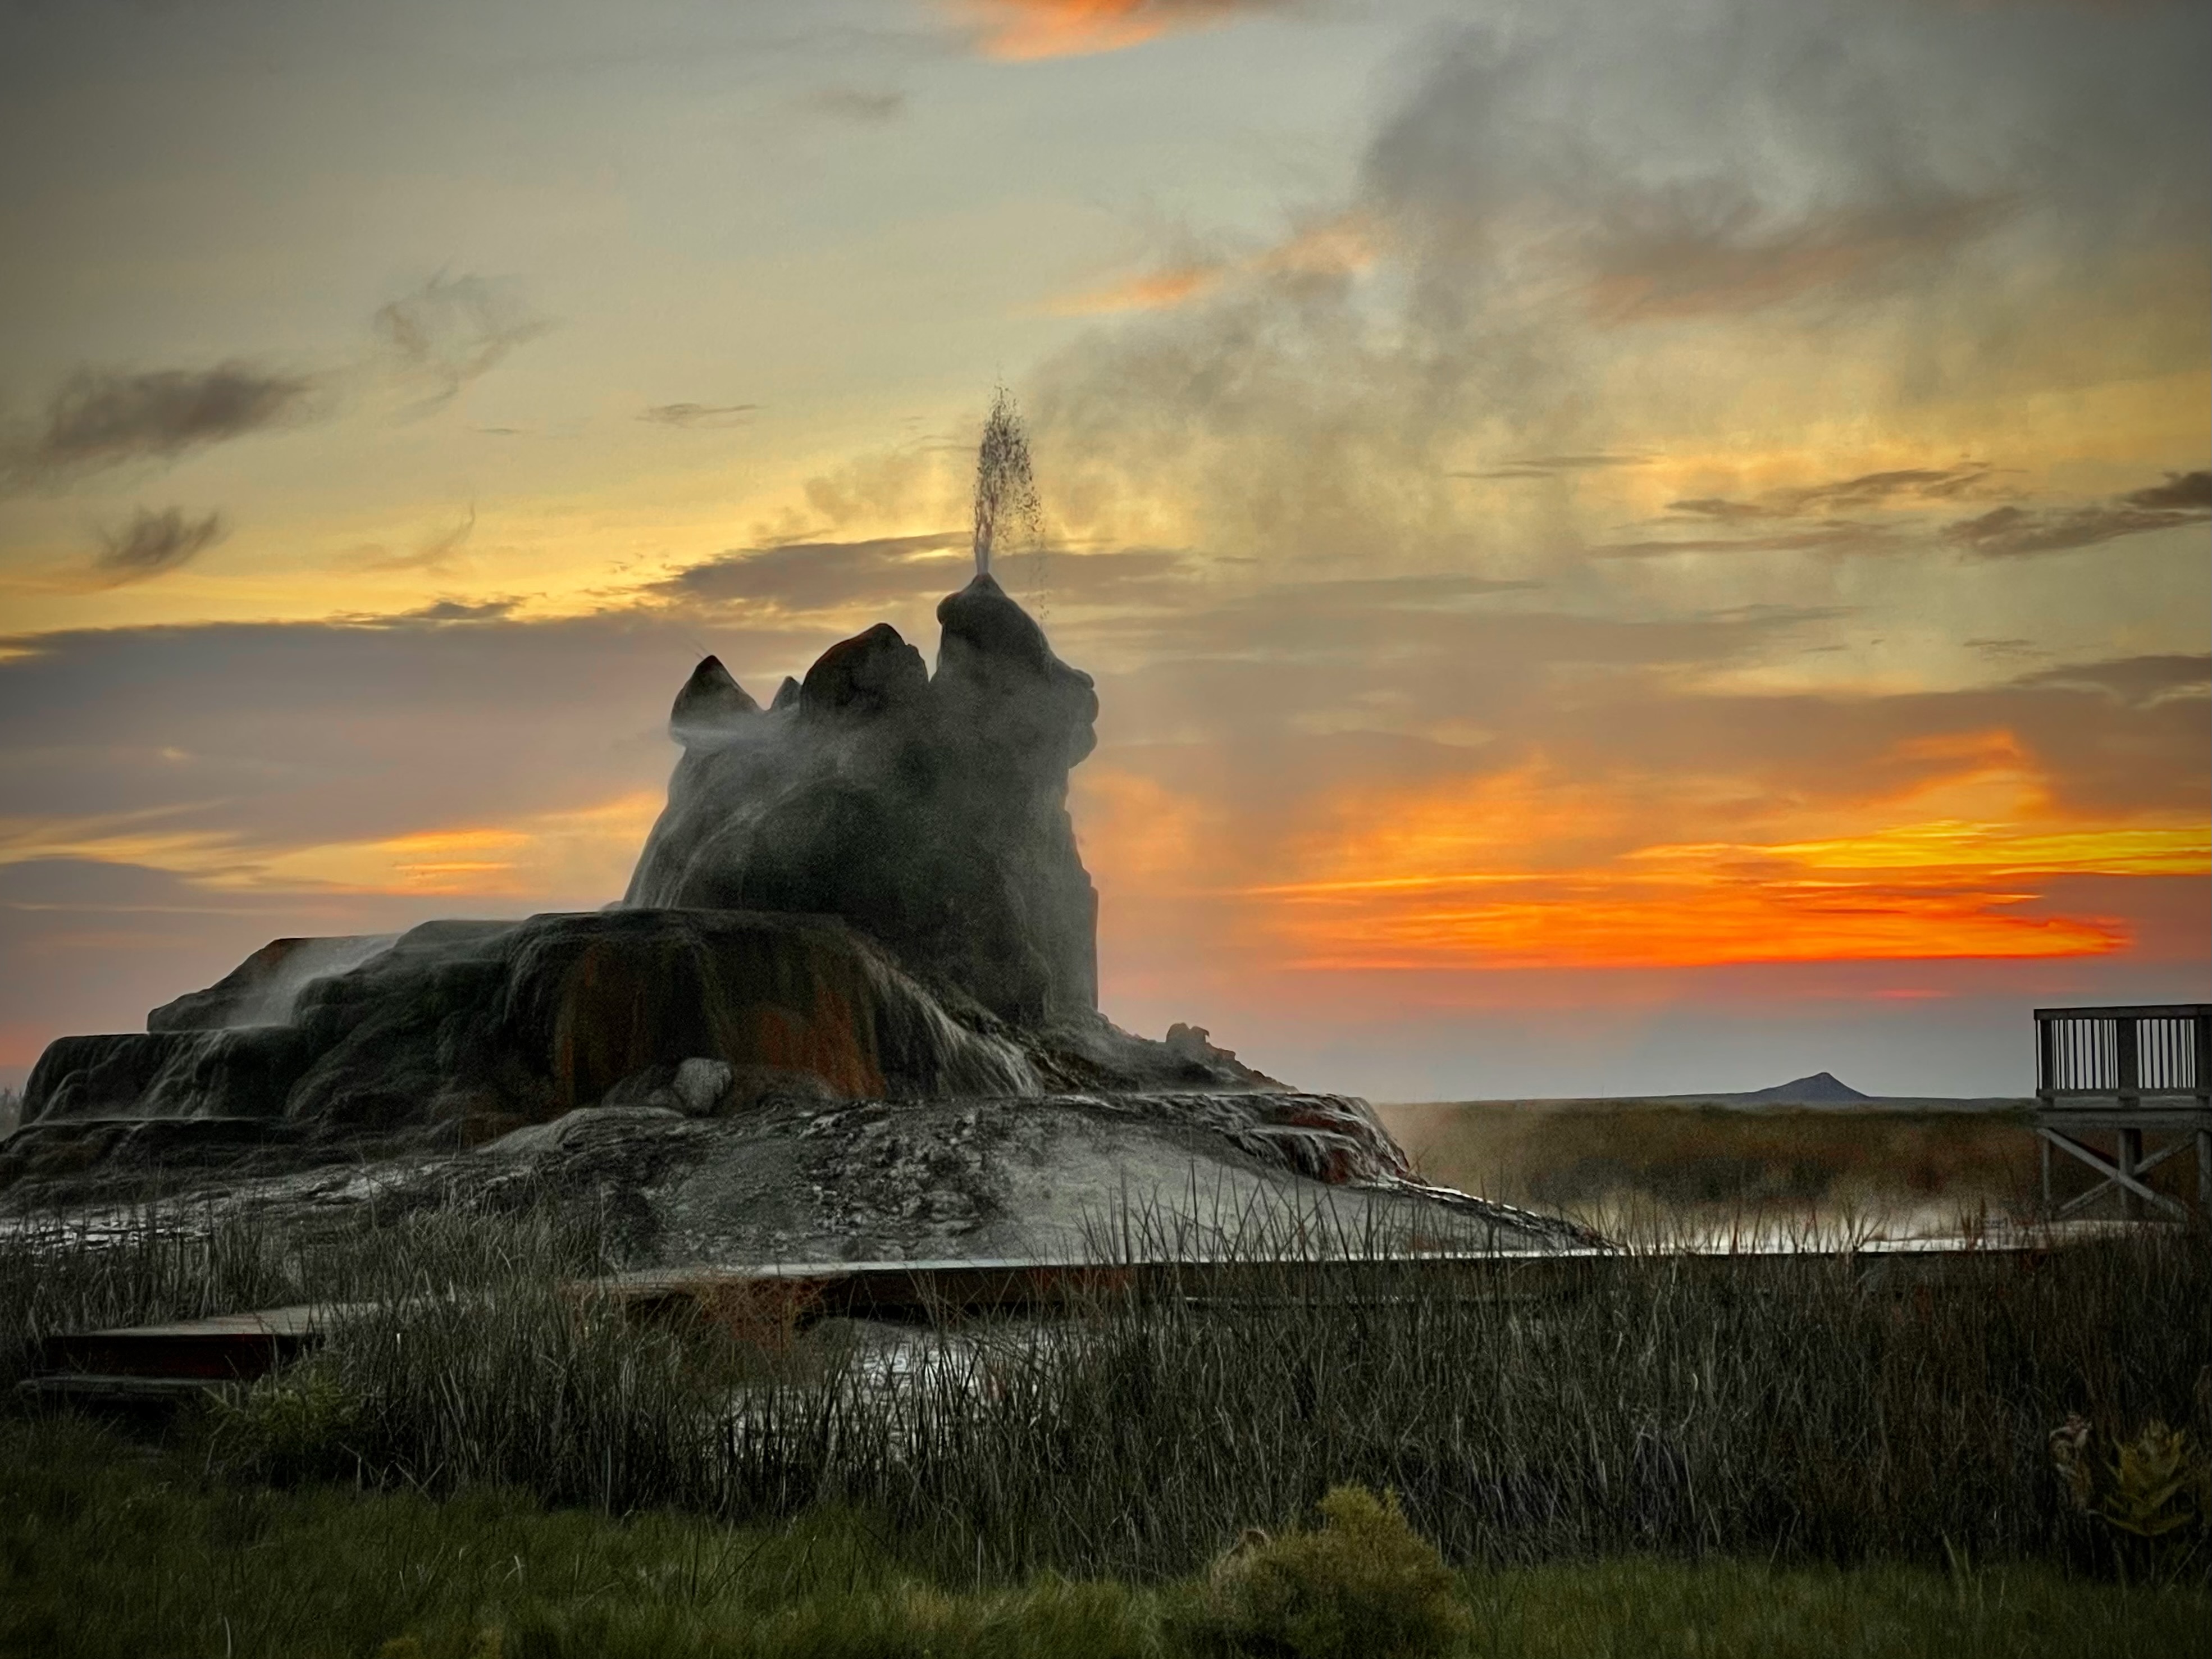 Fly Reservoir + Geyser + Granite Range, Fly Ranch, Hualapai Geothermal Flats / Image by Will Roger